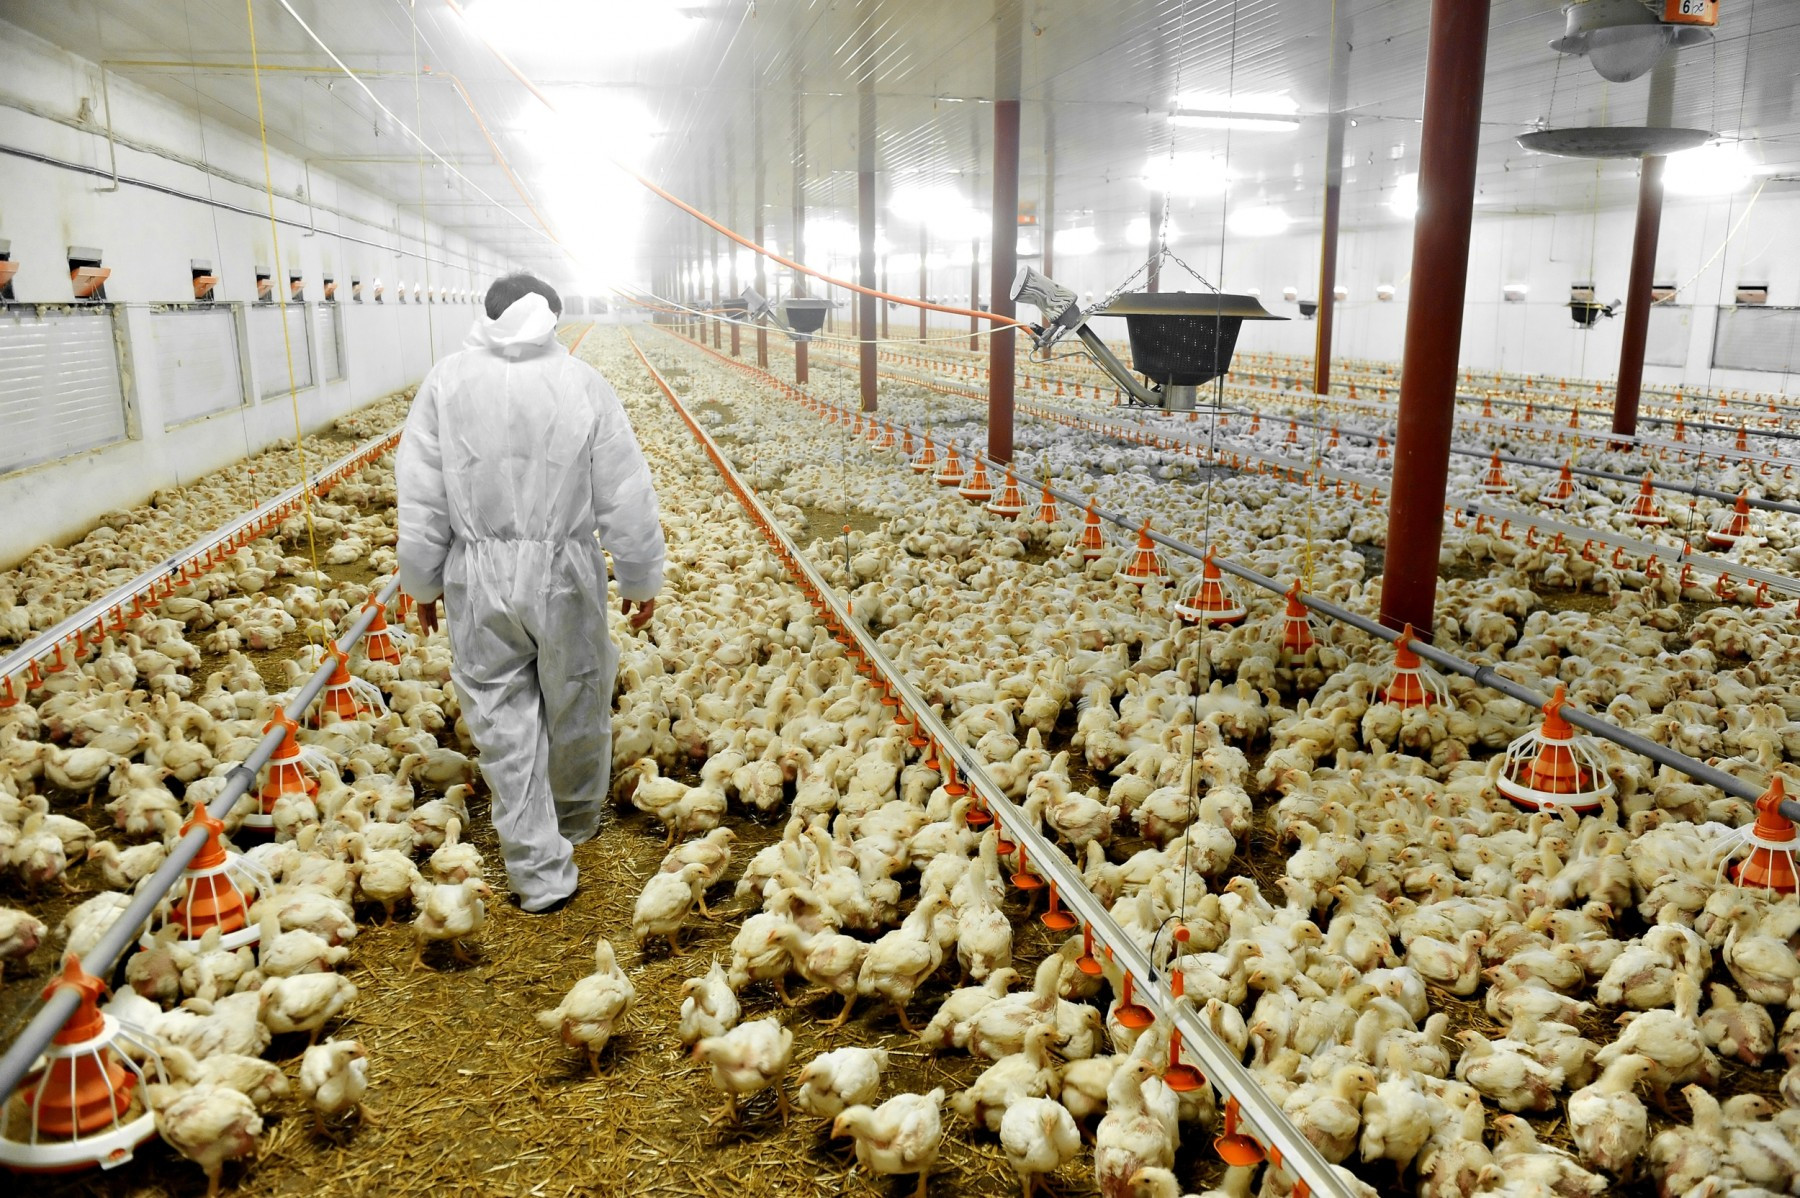 Man walking through crowded chicken shed - World Animal Protection